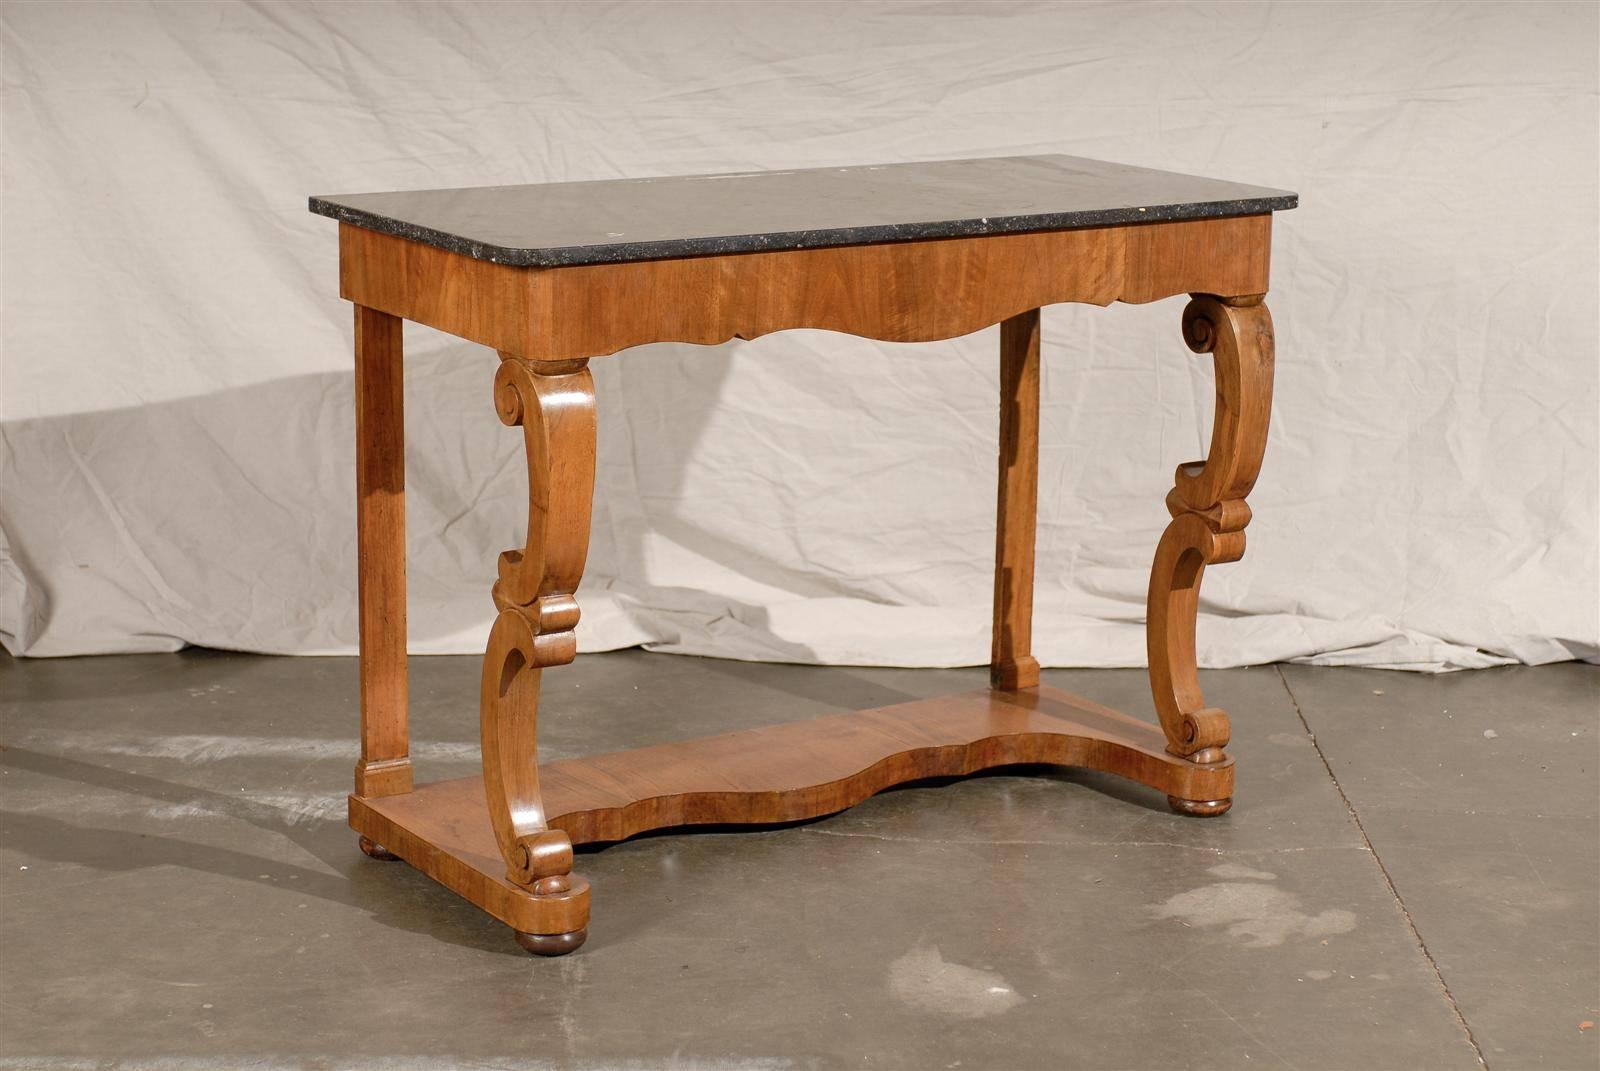 19th century Charles X console with black marble top, circa 1825.